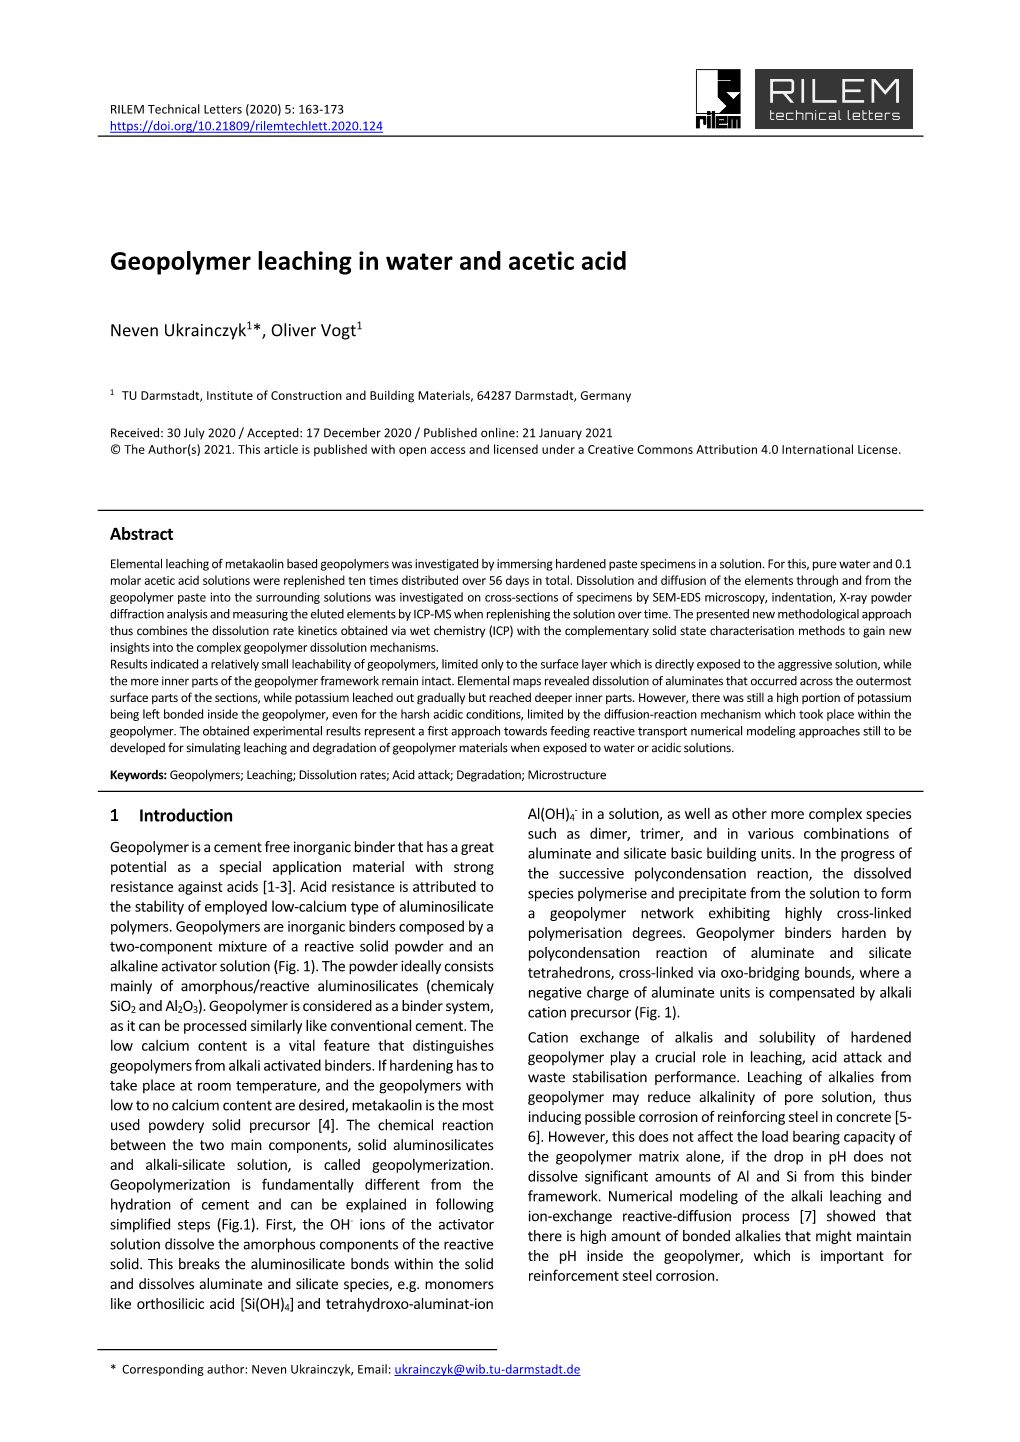 Geopolymer Leaching in Water and Acetic Acid